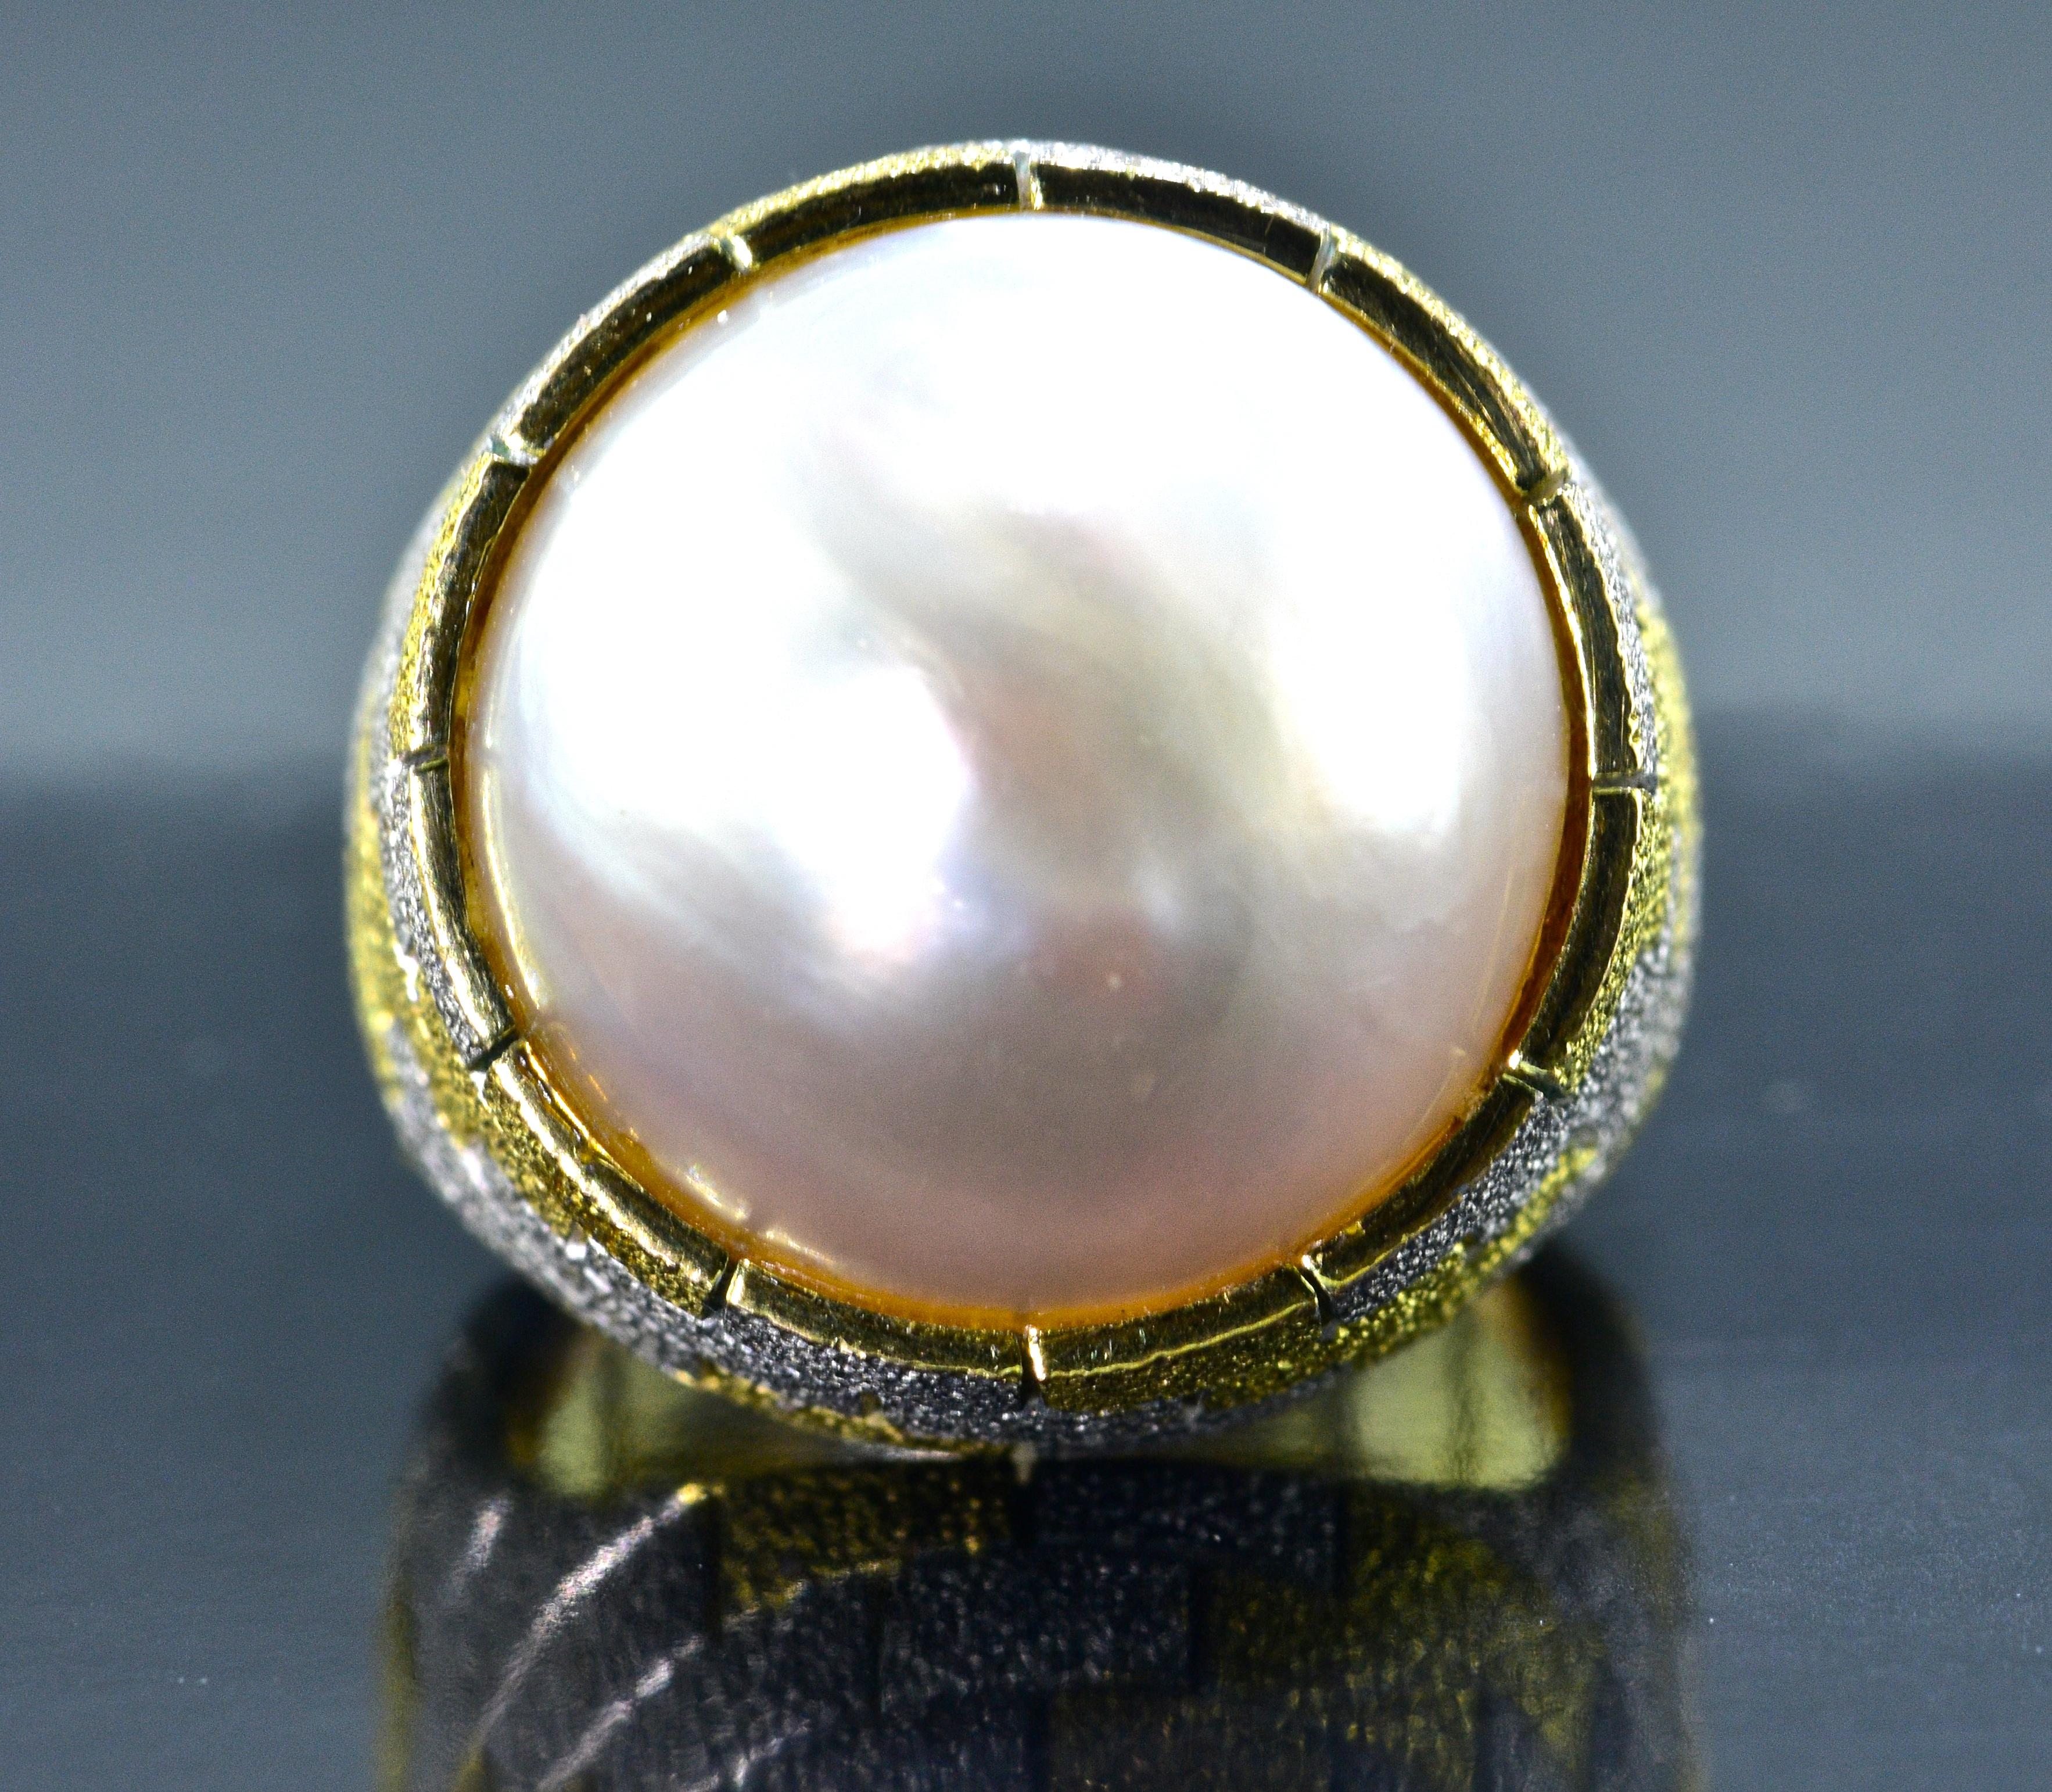 Contemporary 18 Karat Yellow and White Gold Holding a Large Cultured Mabe Pearl, circa 1965